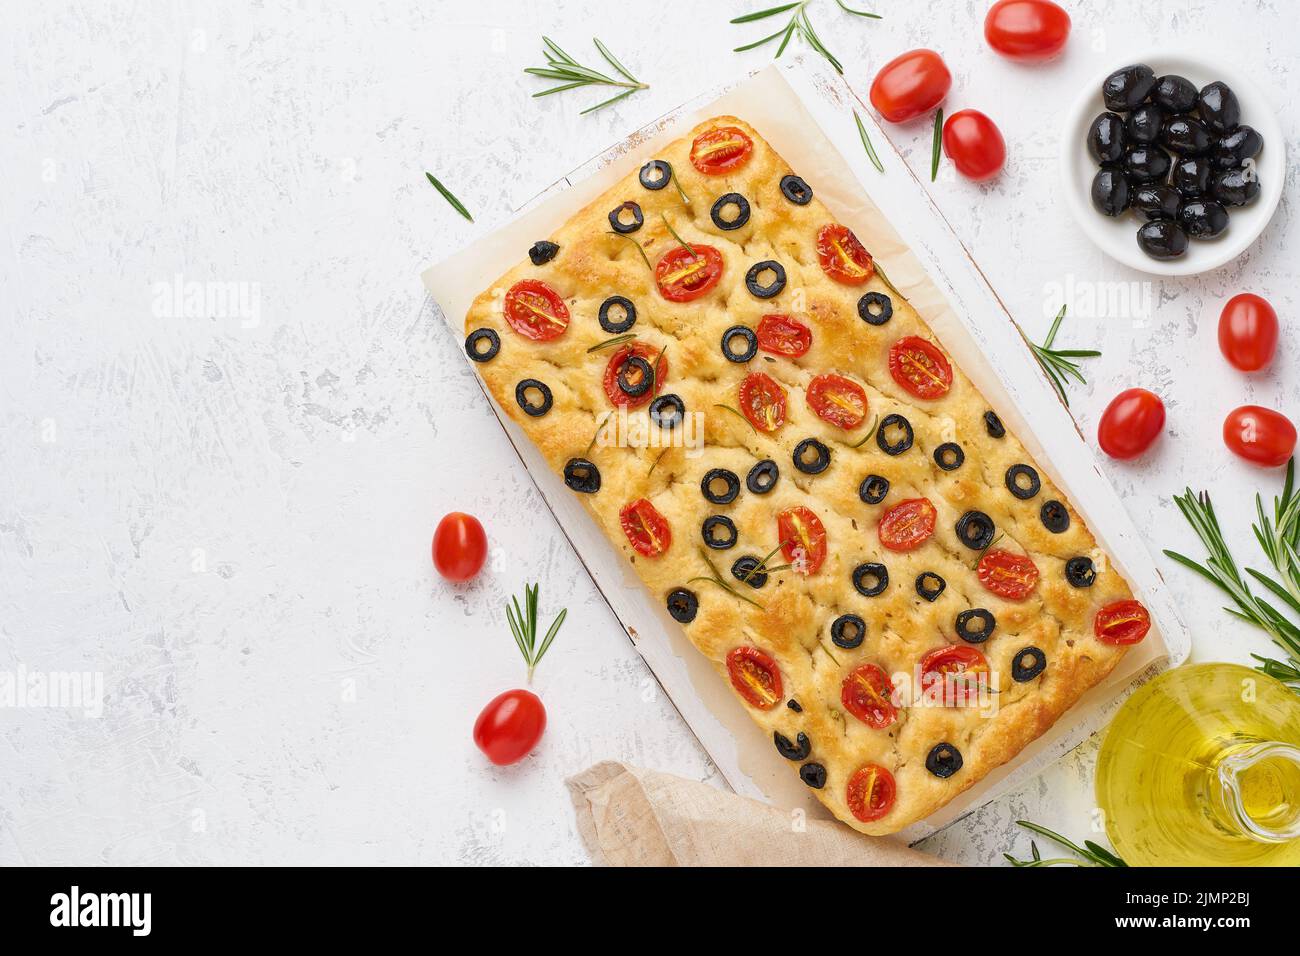 Focaccia with tomatoes, olives and rosemary, copy space, top view. Whole Italian flat bread, Stock Photo